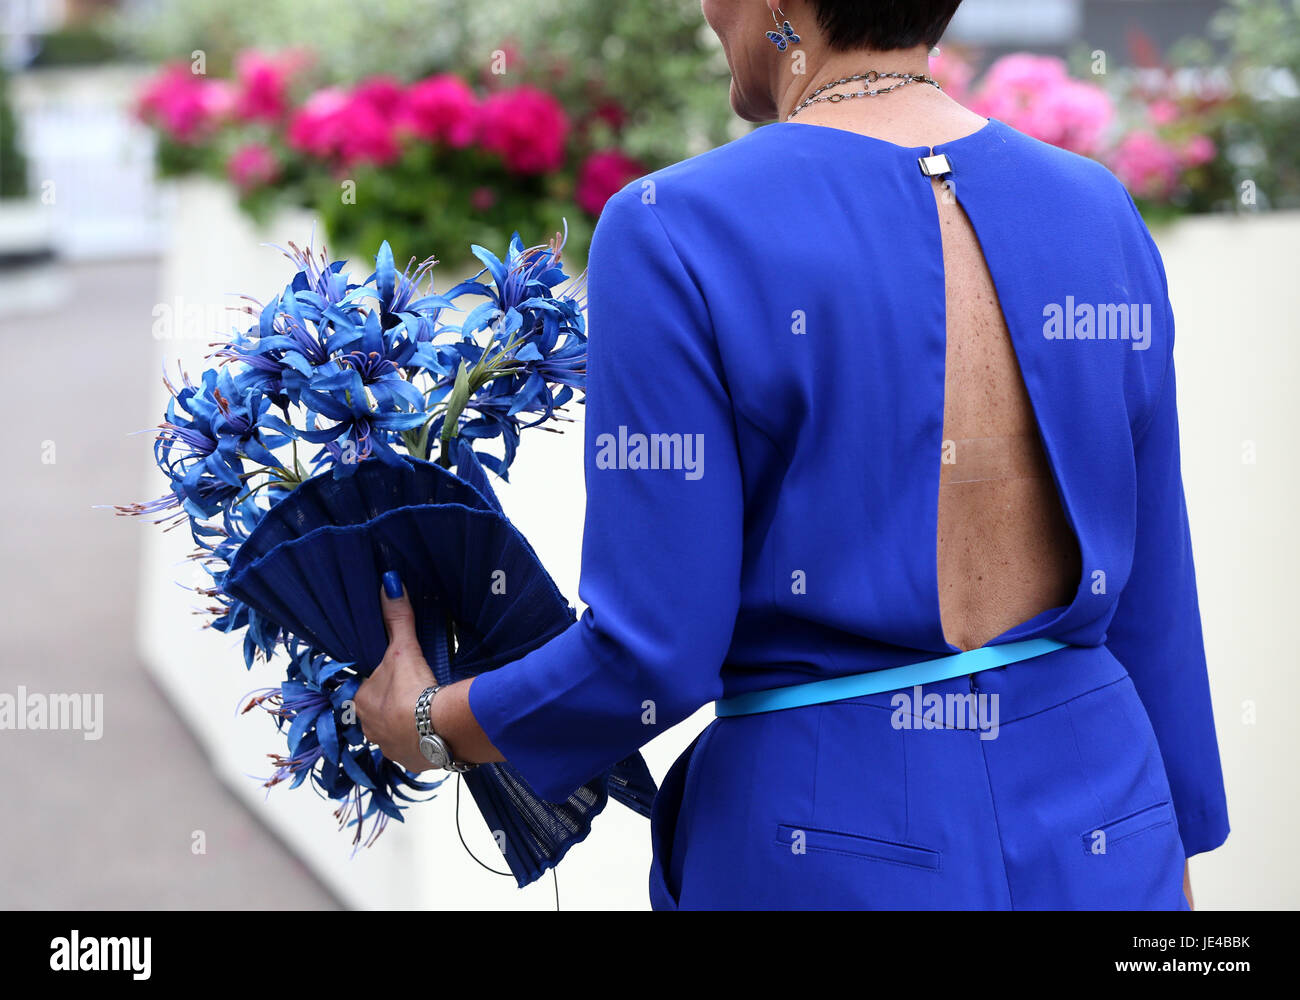 A woman arrives at ascot in a backless jumpsuit during day three of Royal Ascot at Ascot Racecourse. PRESS ASSOCIATION Photo. Picture date: Thursday June 22, 2017. See PA story RACING Ascot. Photo credit should read: Jonathan Brady/PA Wire. Stock Photo